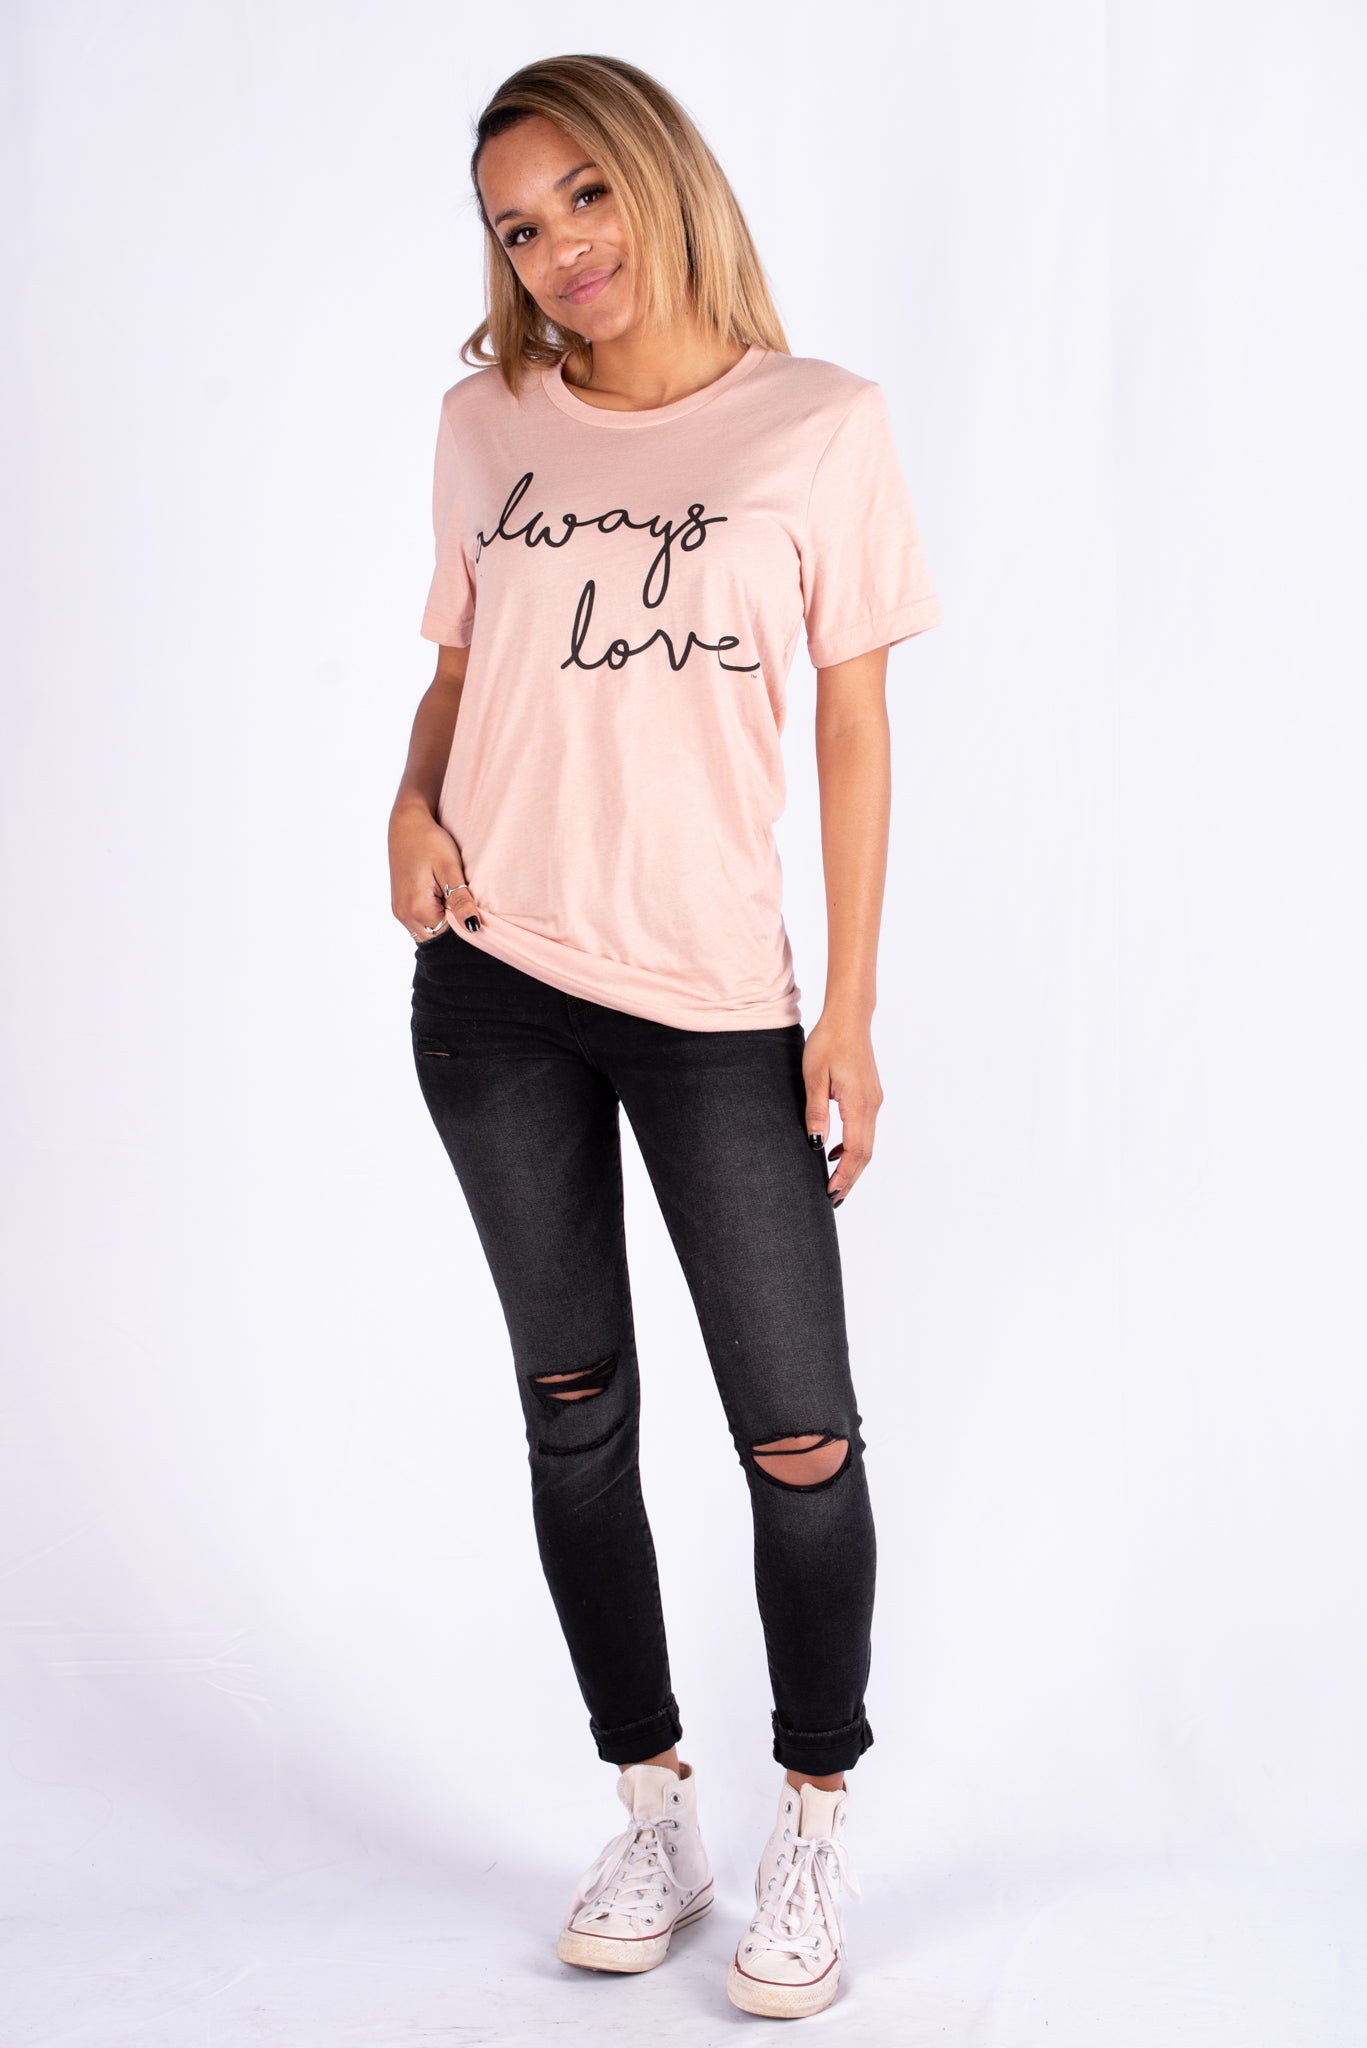 Always love unisex short sleeve t-shirt peach - Trendy T-shirts - Cute Graphic Tee Fashion at Lush Fashion Lounge Boutique in Oklahoma